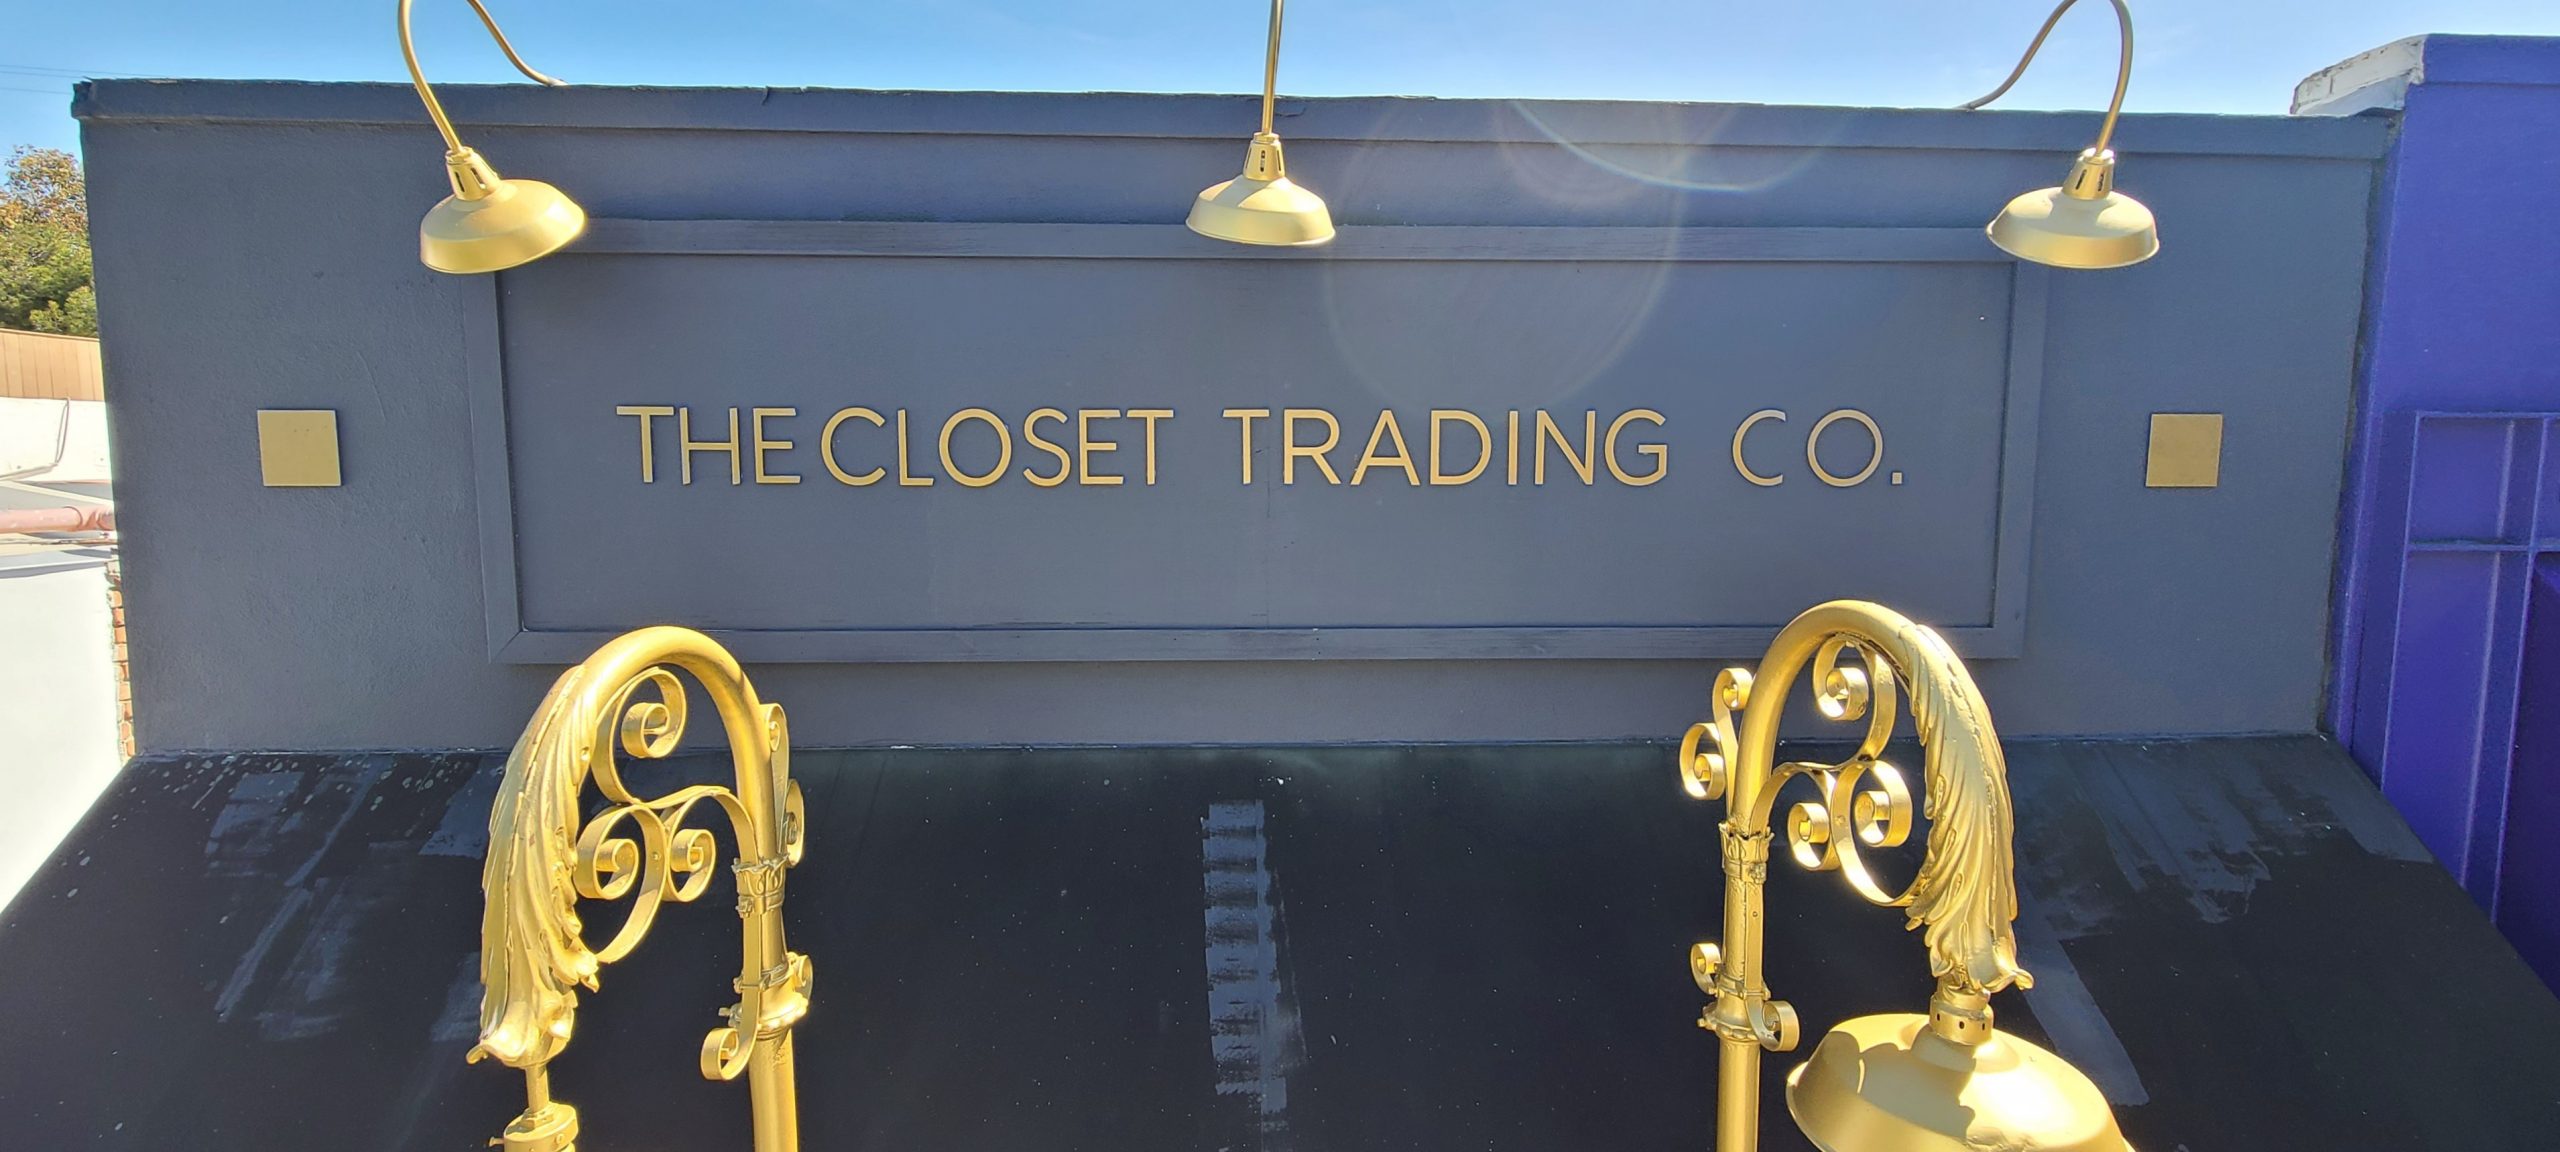 Dimensional letters make for great storefront signs such as this boutique sign we fabricated and installed for The Closet Trading Company in Santa Monica.